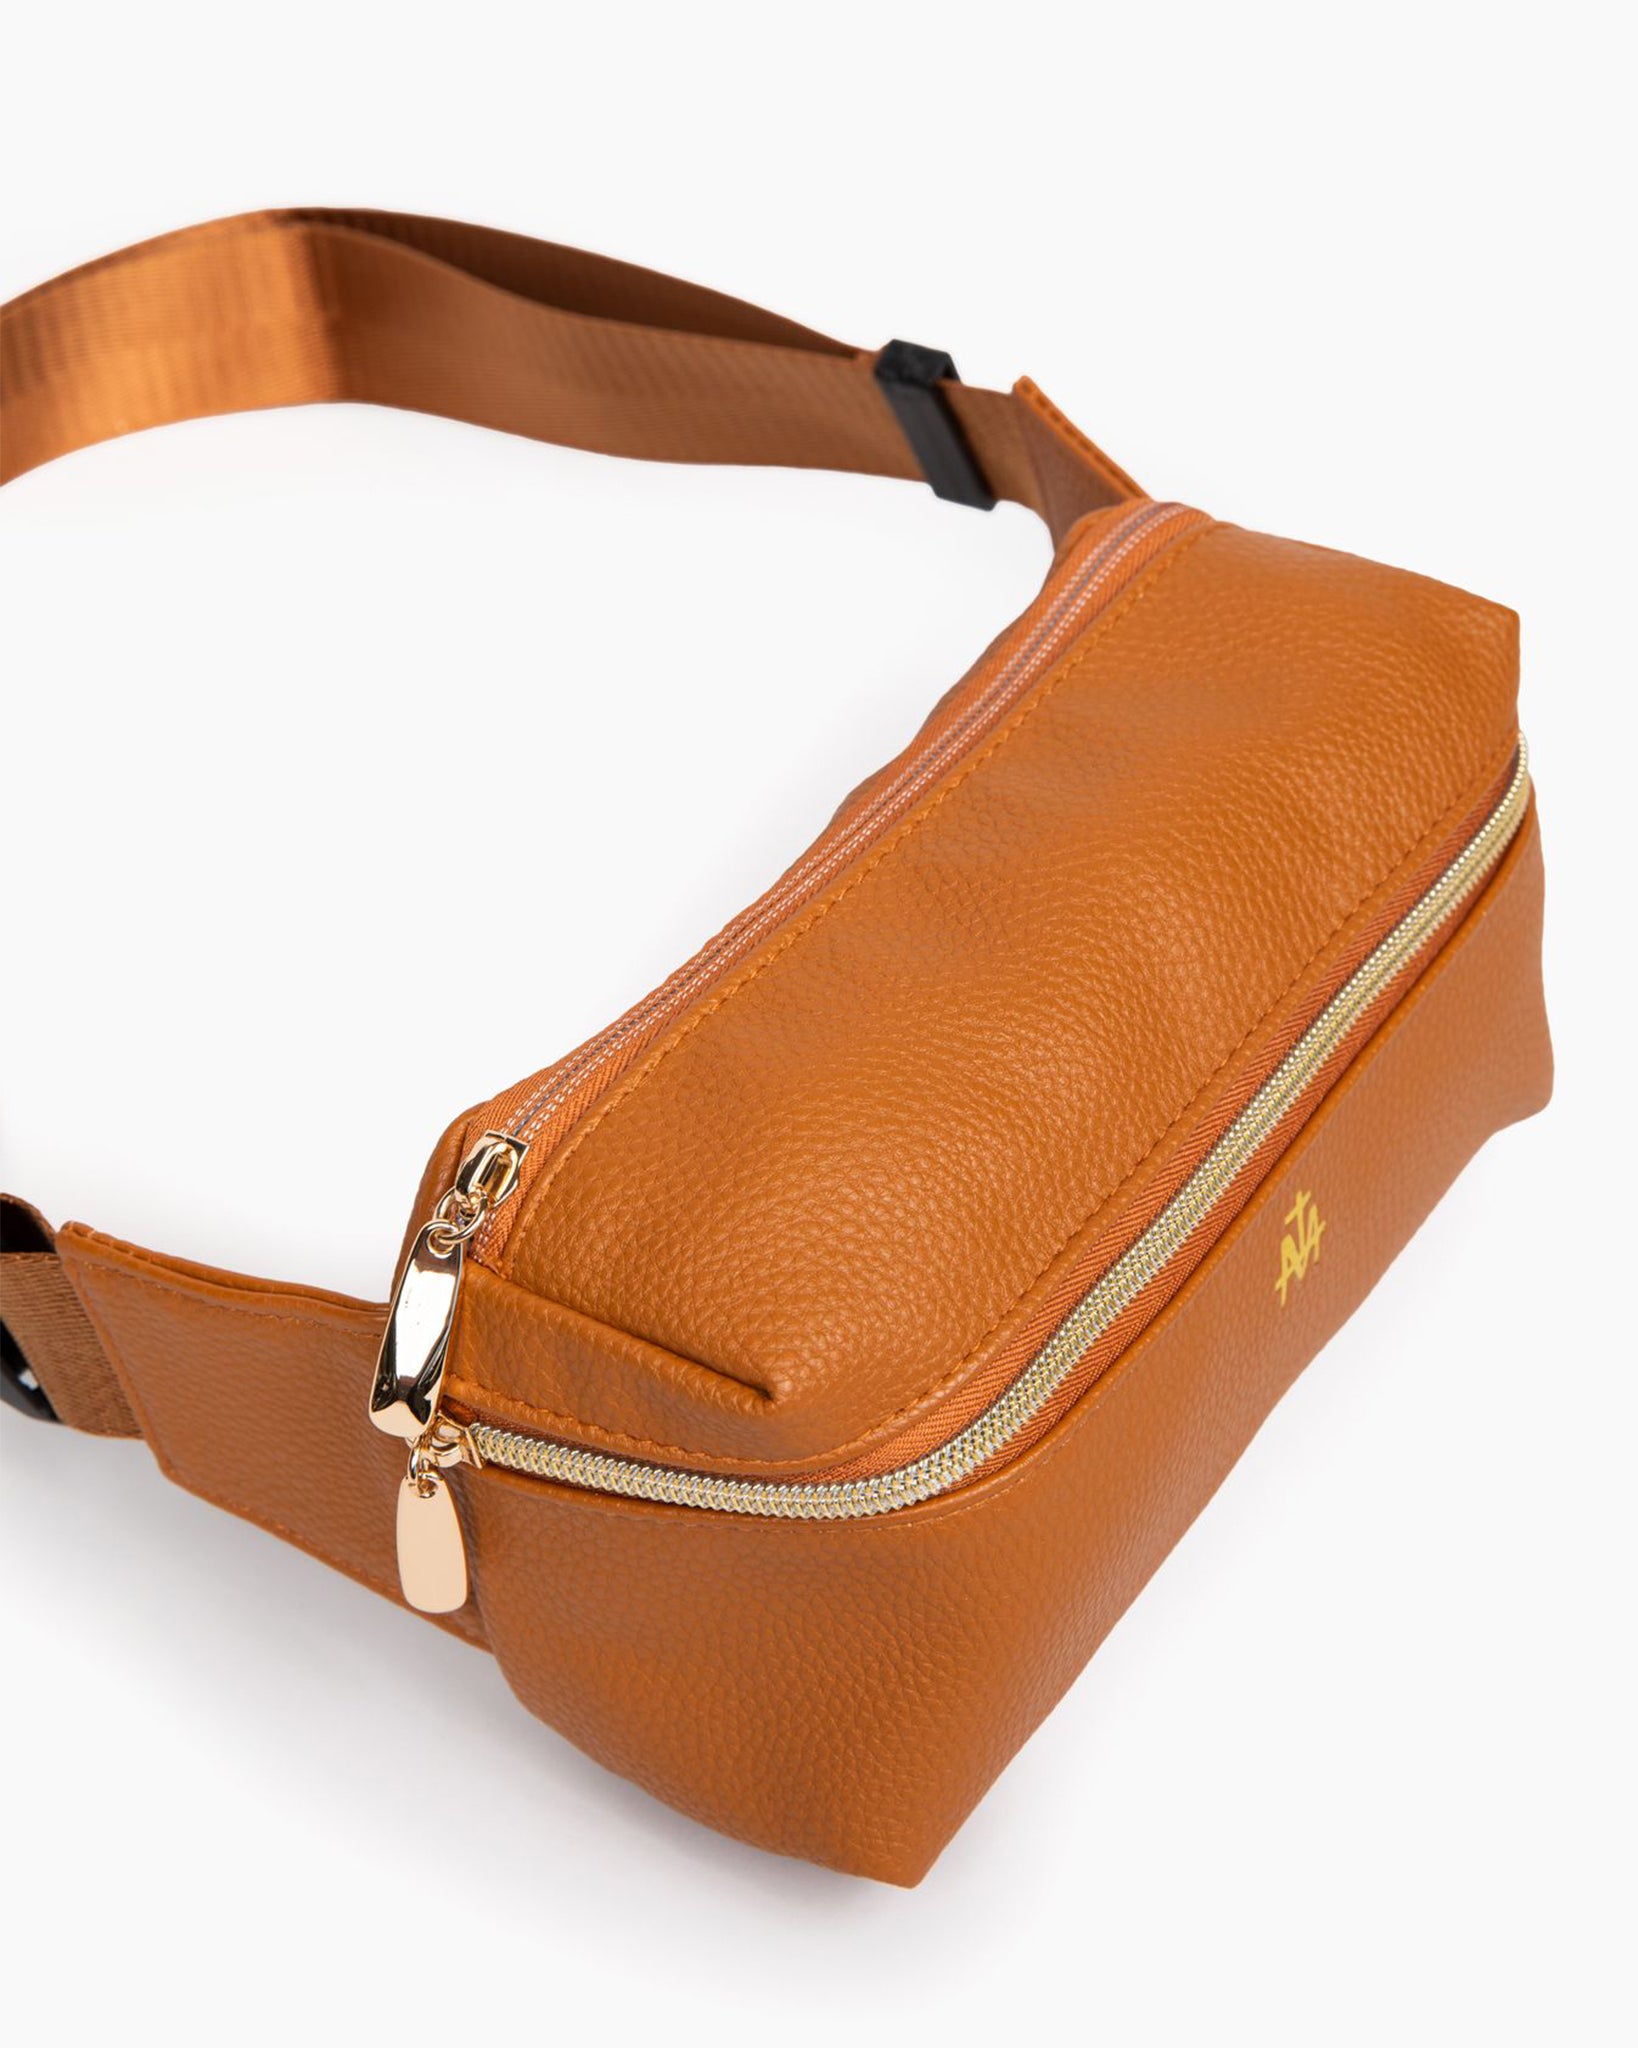 Lululemon Just Launched a Holiday Take on the Viral Belt Bag